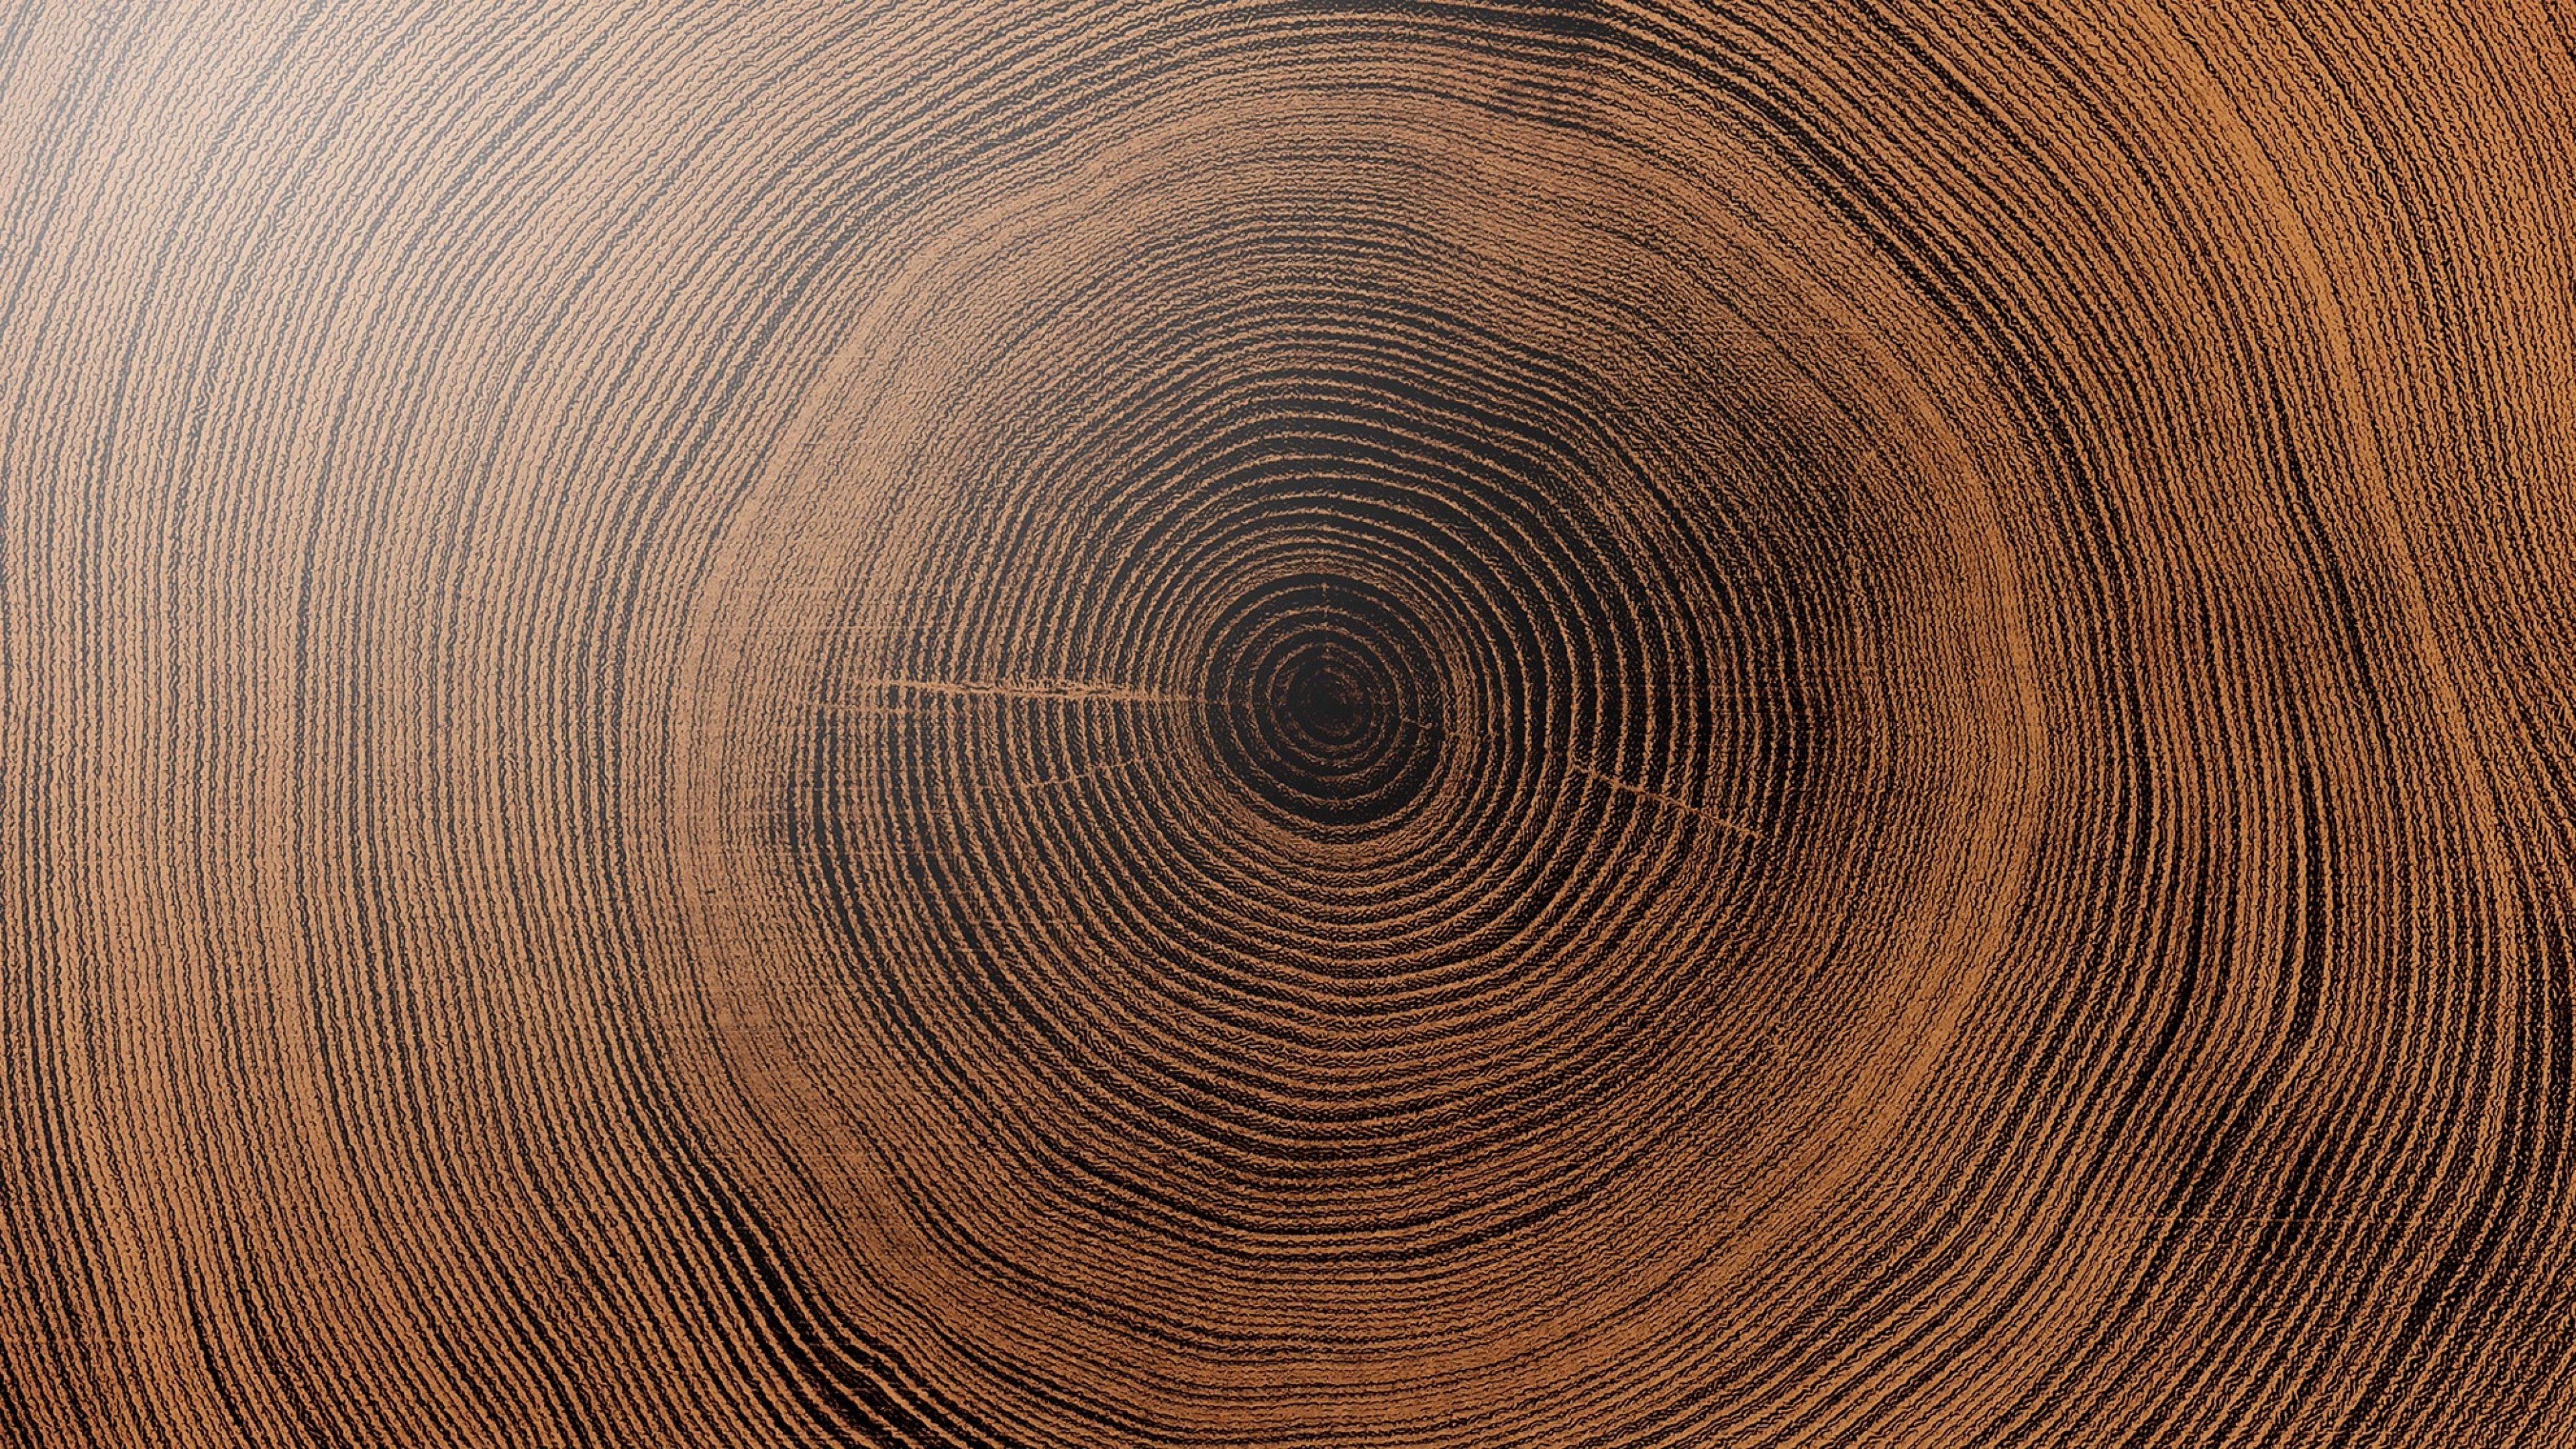 Old wooden oak tree cut surface. Detailed warm dark brown and orange tones of a felled tree trunk or stump. Rough organic texture of tree rings with close up of end grain.; Shutterstock ID 1532196809; purchase_order: Swiss Life Asset Managers France; job: Swiss Life Asset Managers France; client: Swiss Life Asset Managers France; other: Swiss Life Asset Managers France